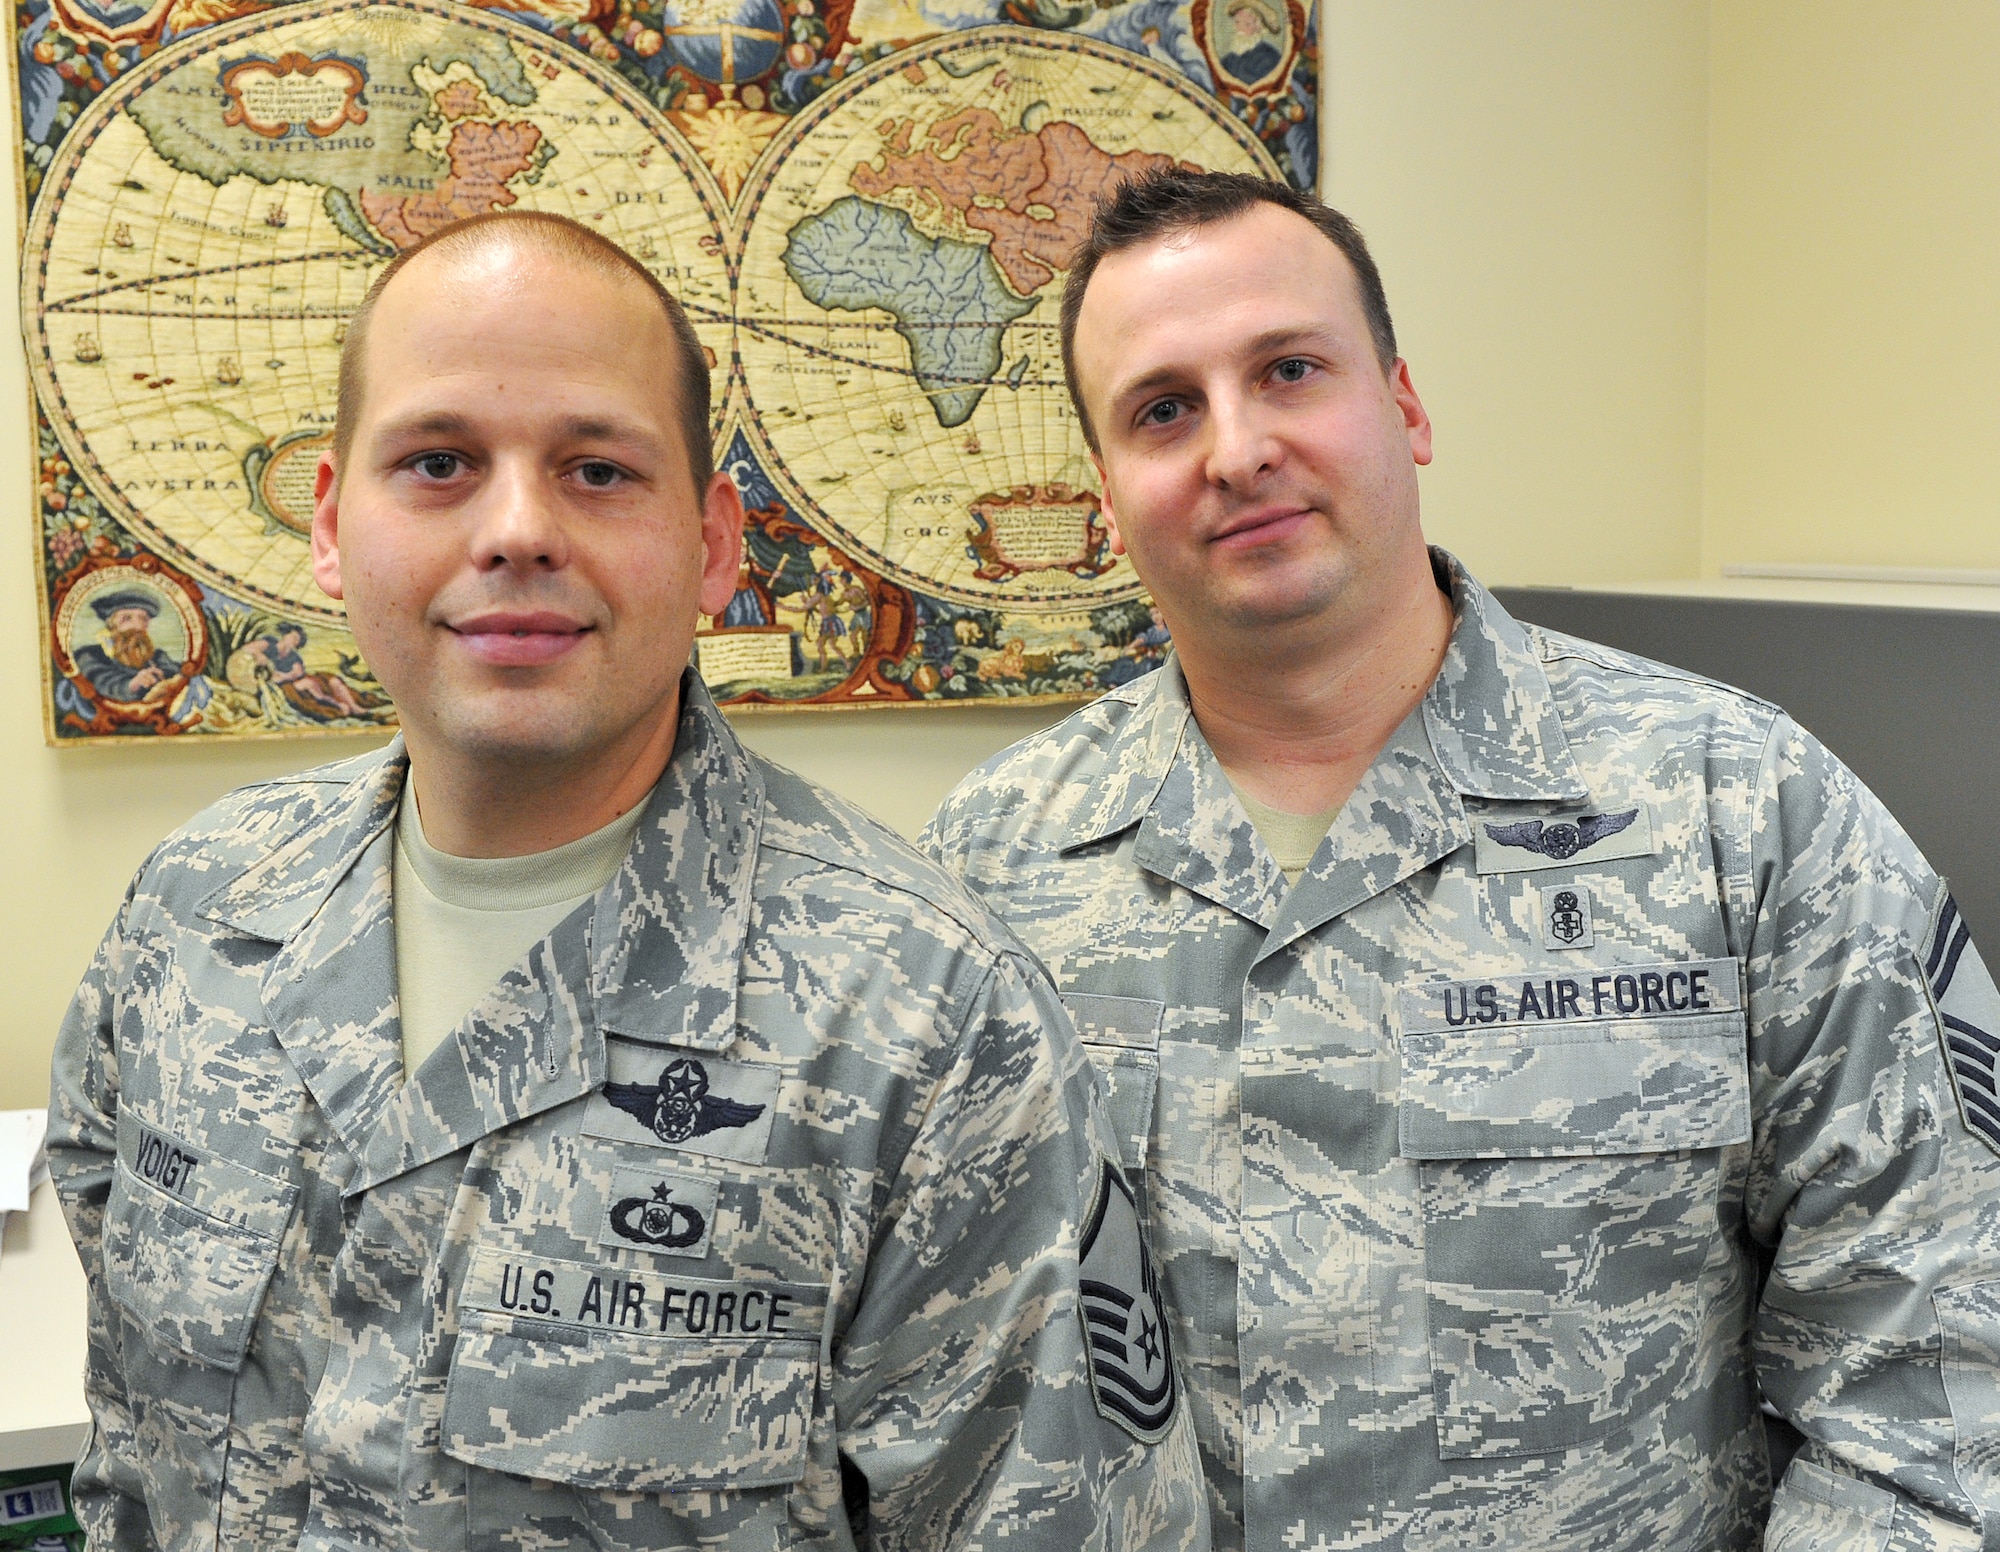 Brothers Master Sgt. Sven Voigt, left, and Senior Master Sgt. Keyser Voigt, are German-born U.S. Airmen and naturalized citizens serving at Robins. (U.S. Air Force photo by Tommie Horton)